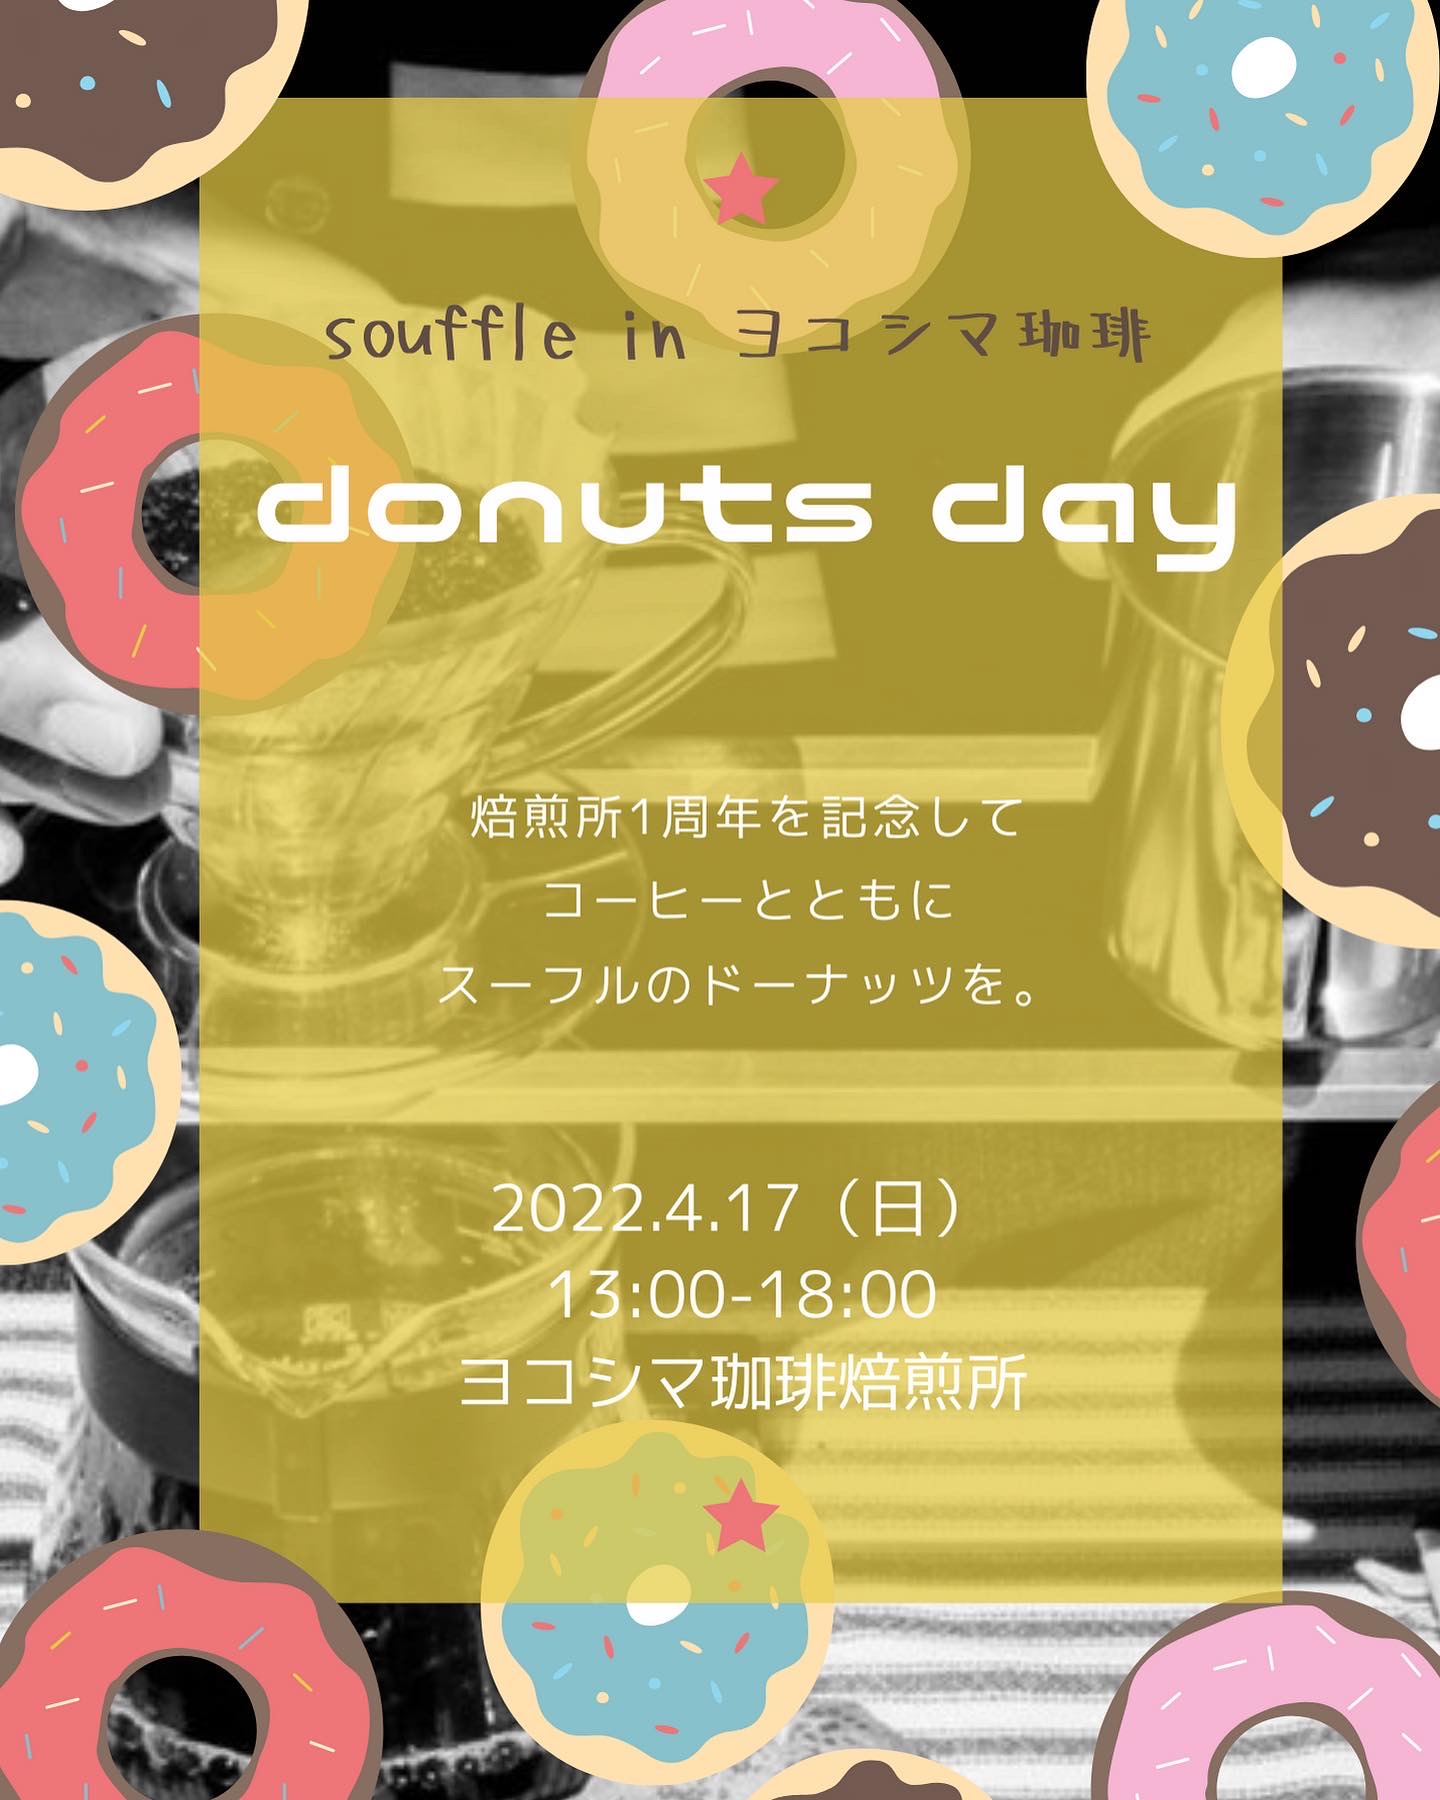 souffle donuts day